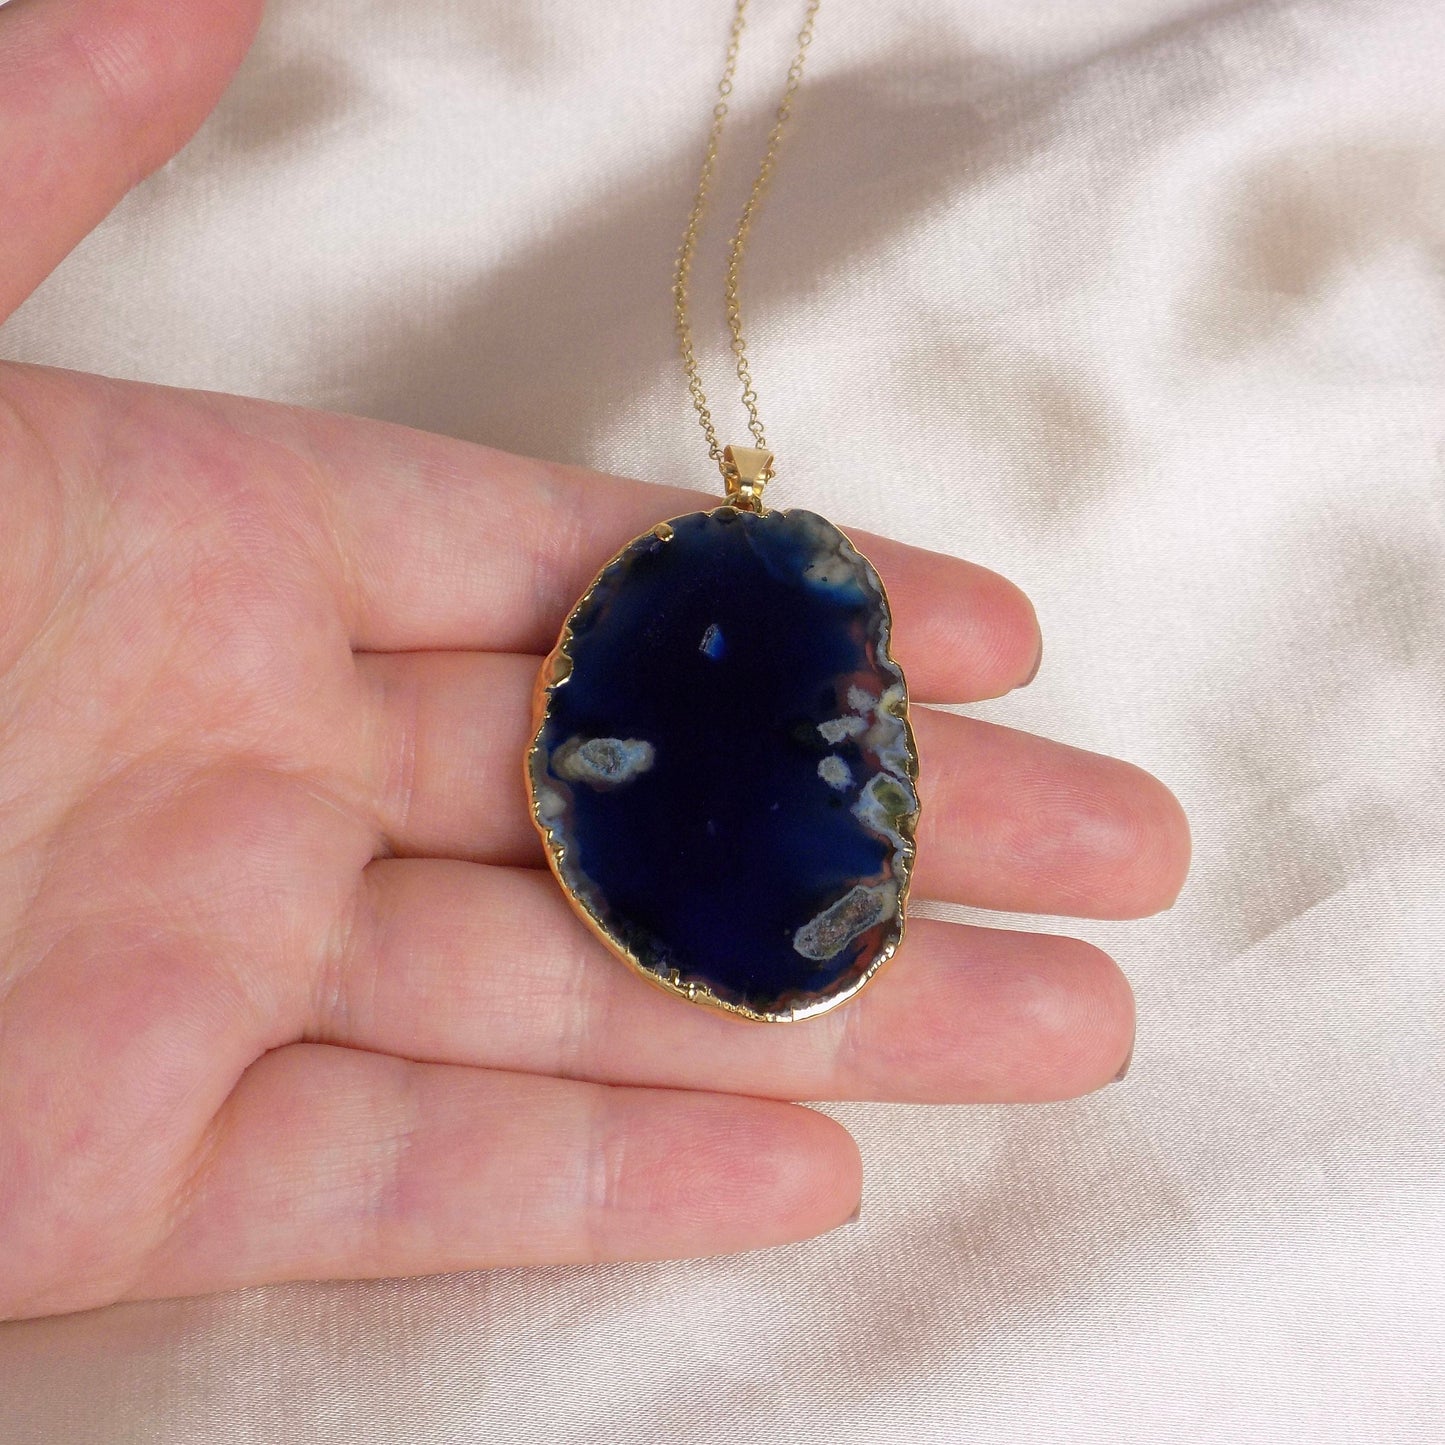 Blue Slice Agate Necklace, Sliced Agate Pendant, Gold Necklace, Boho Necklace, Geode Necklace, Layering Necklace, Gift, Raw Stone, G15-121